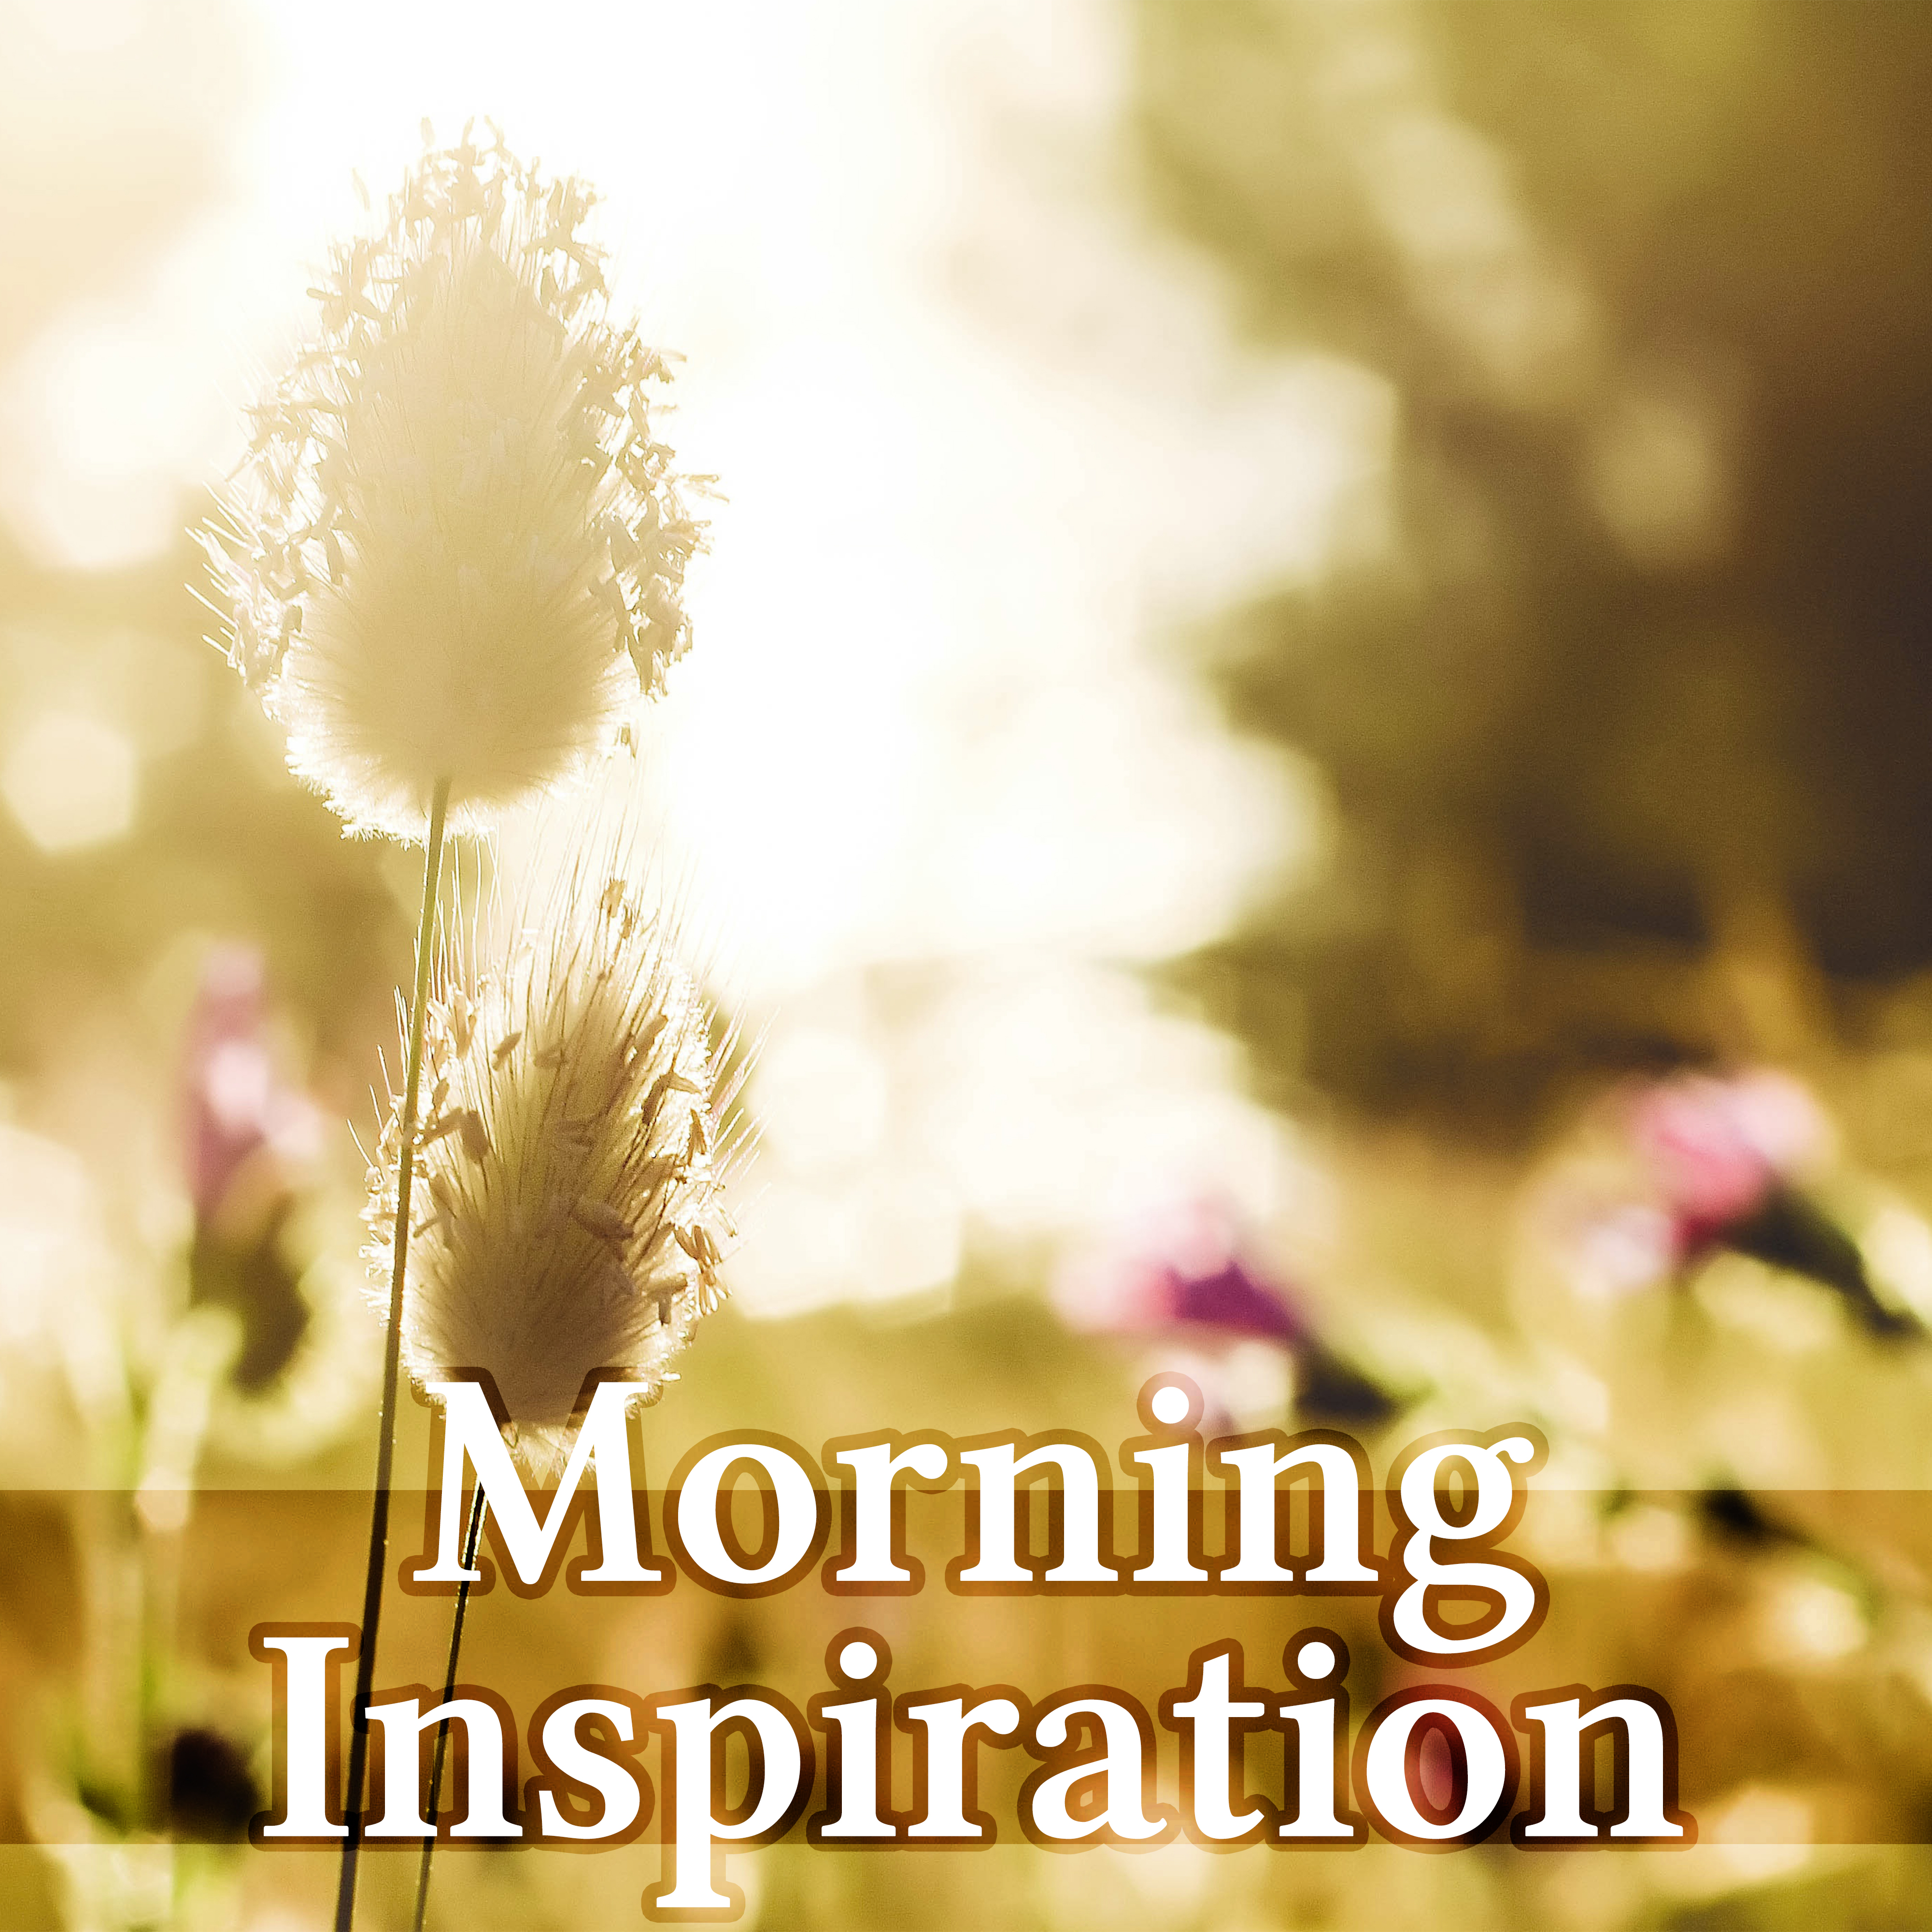 Morning Inspiration - Good Day with Relaxing Sounds & Sounds of Nature, Calm Background Music for Reduce Stress the Body & Mind, Wake Up, Positive Attitude to the World, Morning Coffee, Yoga